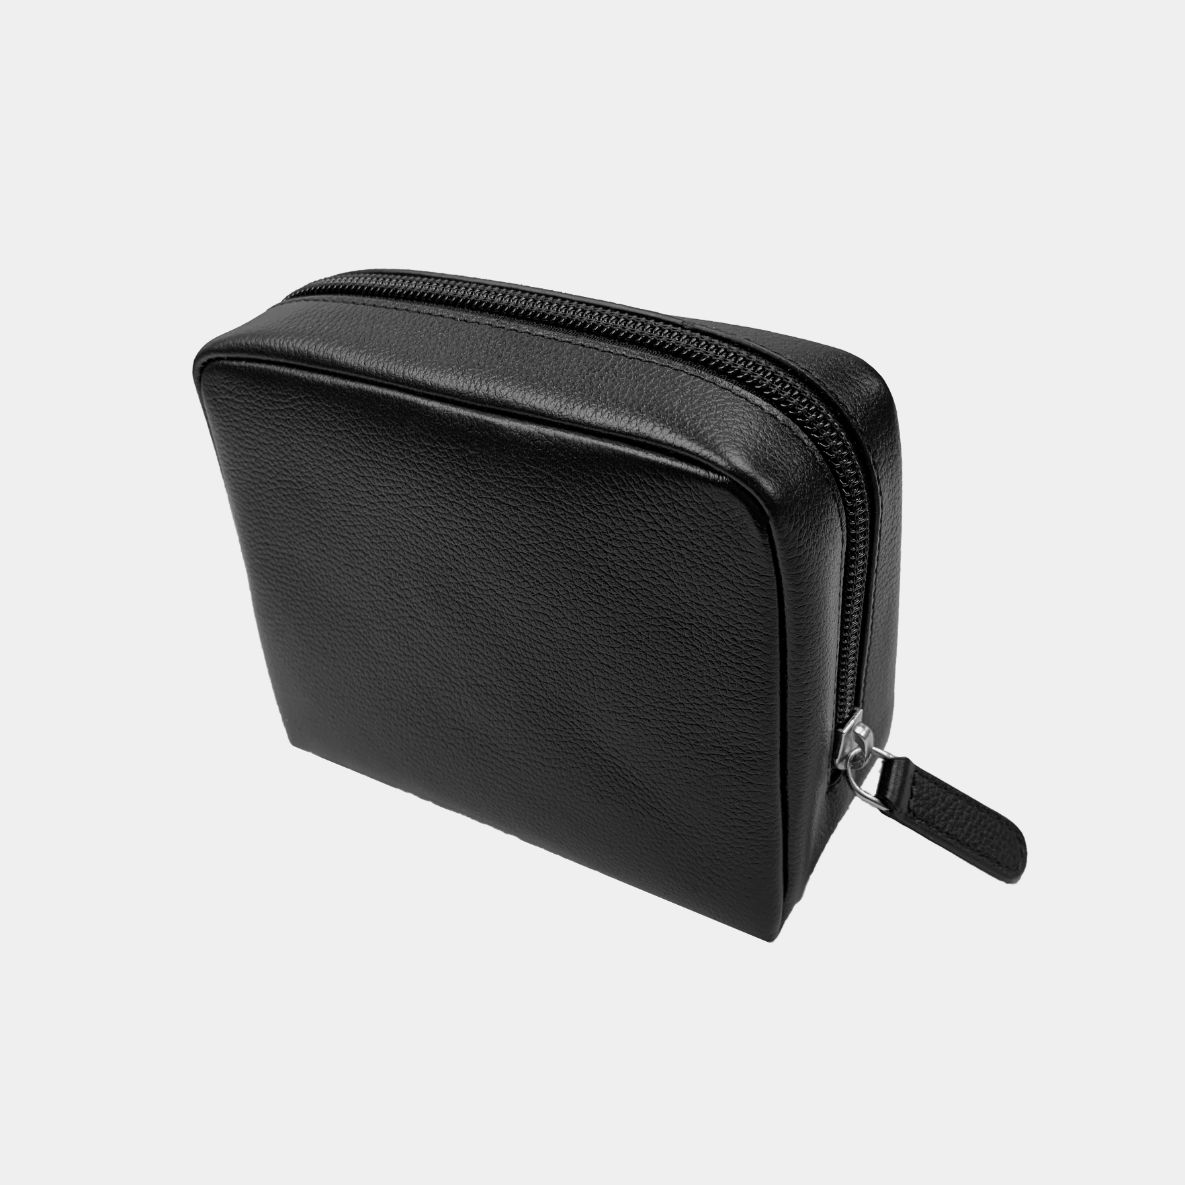 Small leather wash bag designed for overnight stays, embossed with your company logo for corporate gifting.